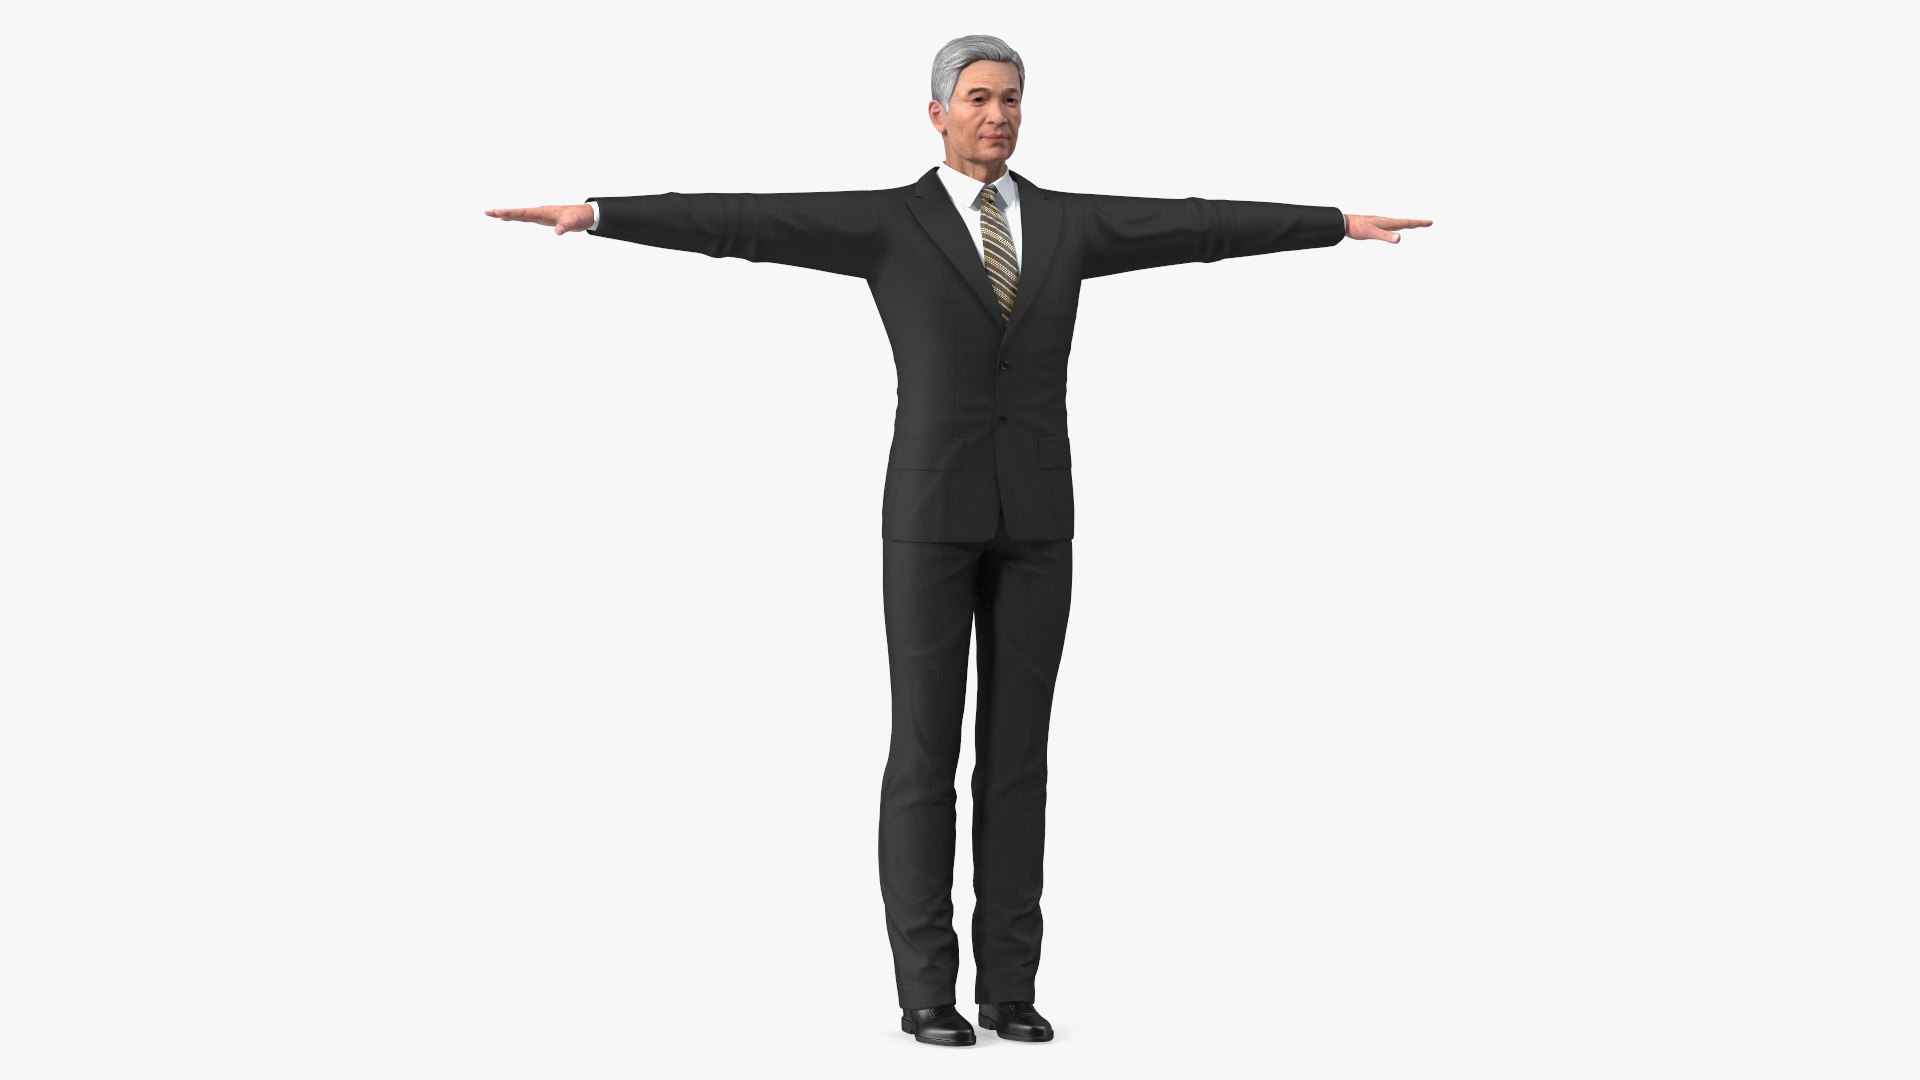 Stylized t pose character | 3D model